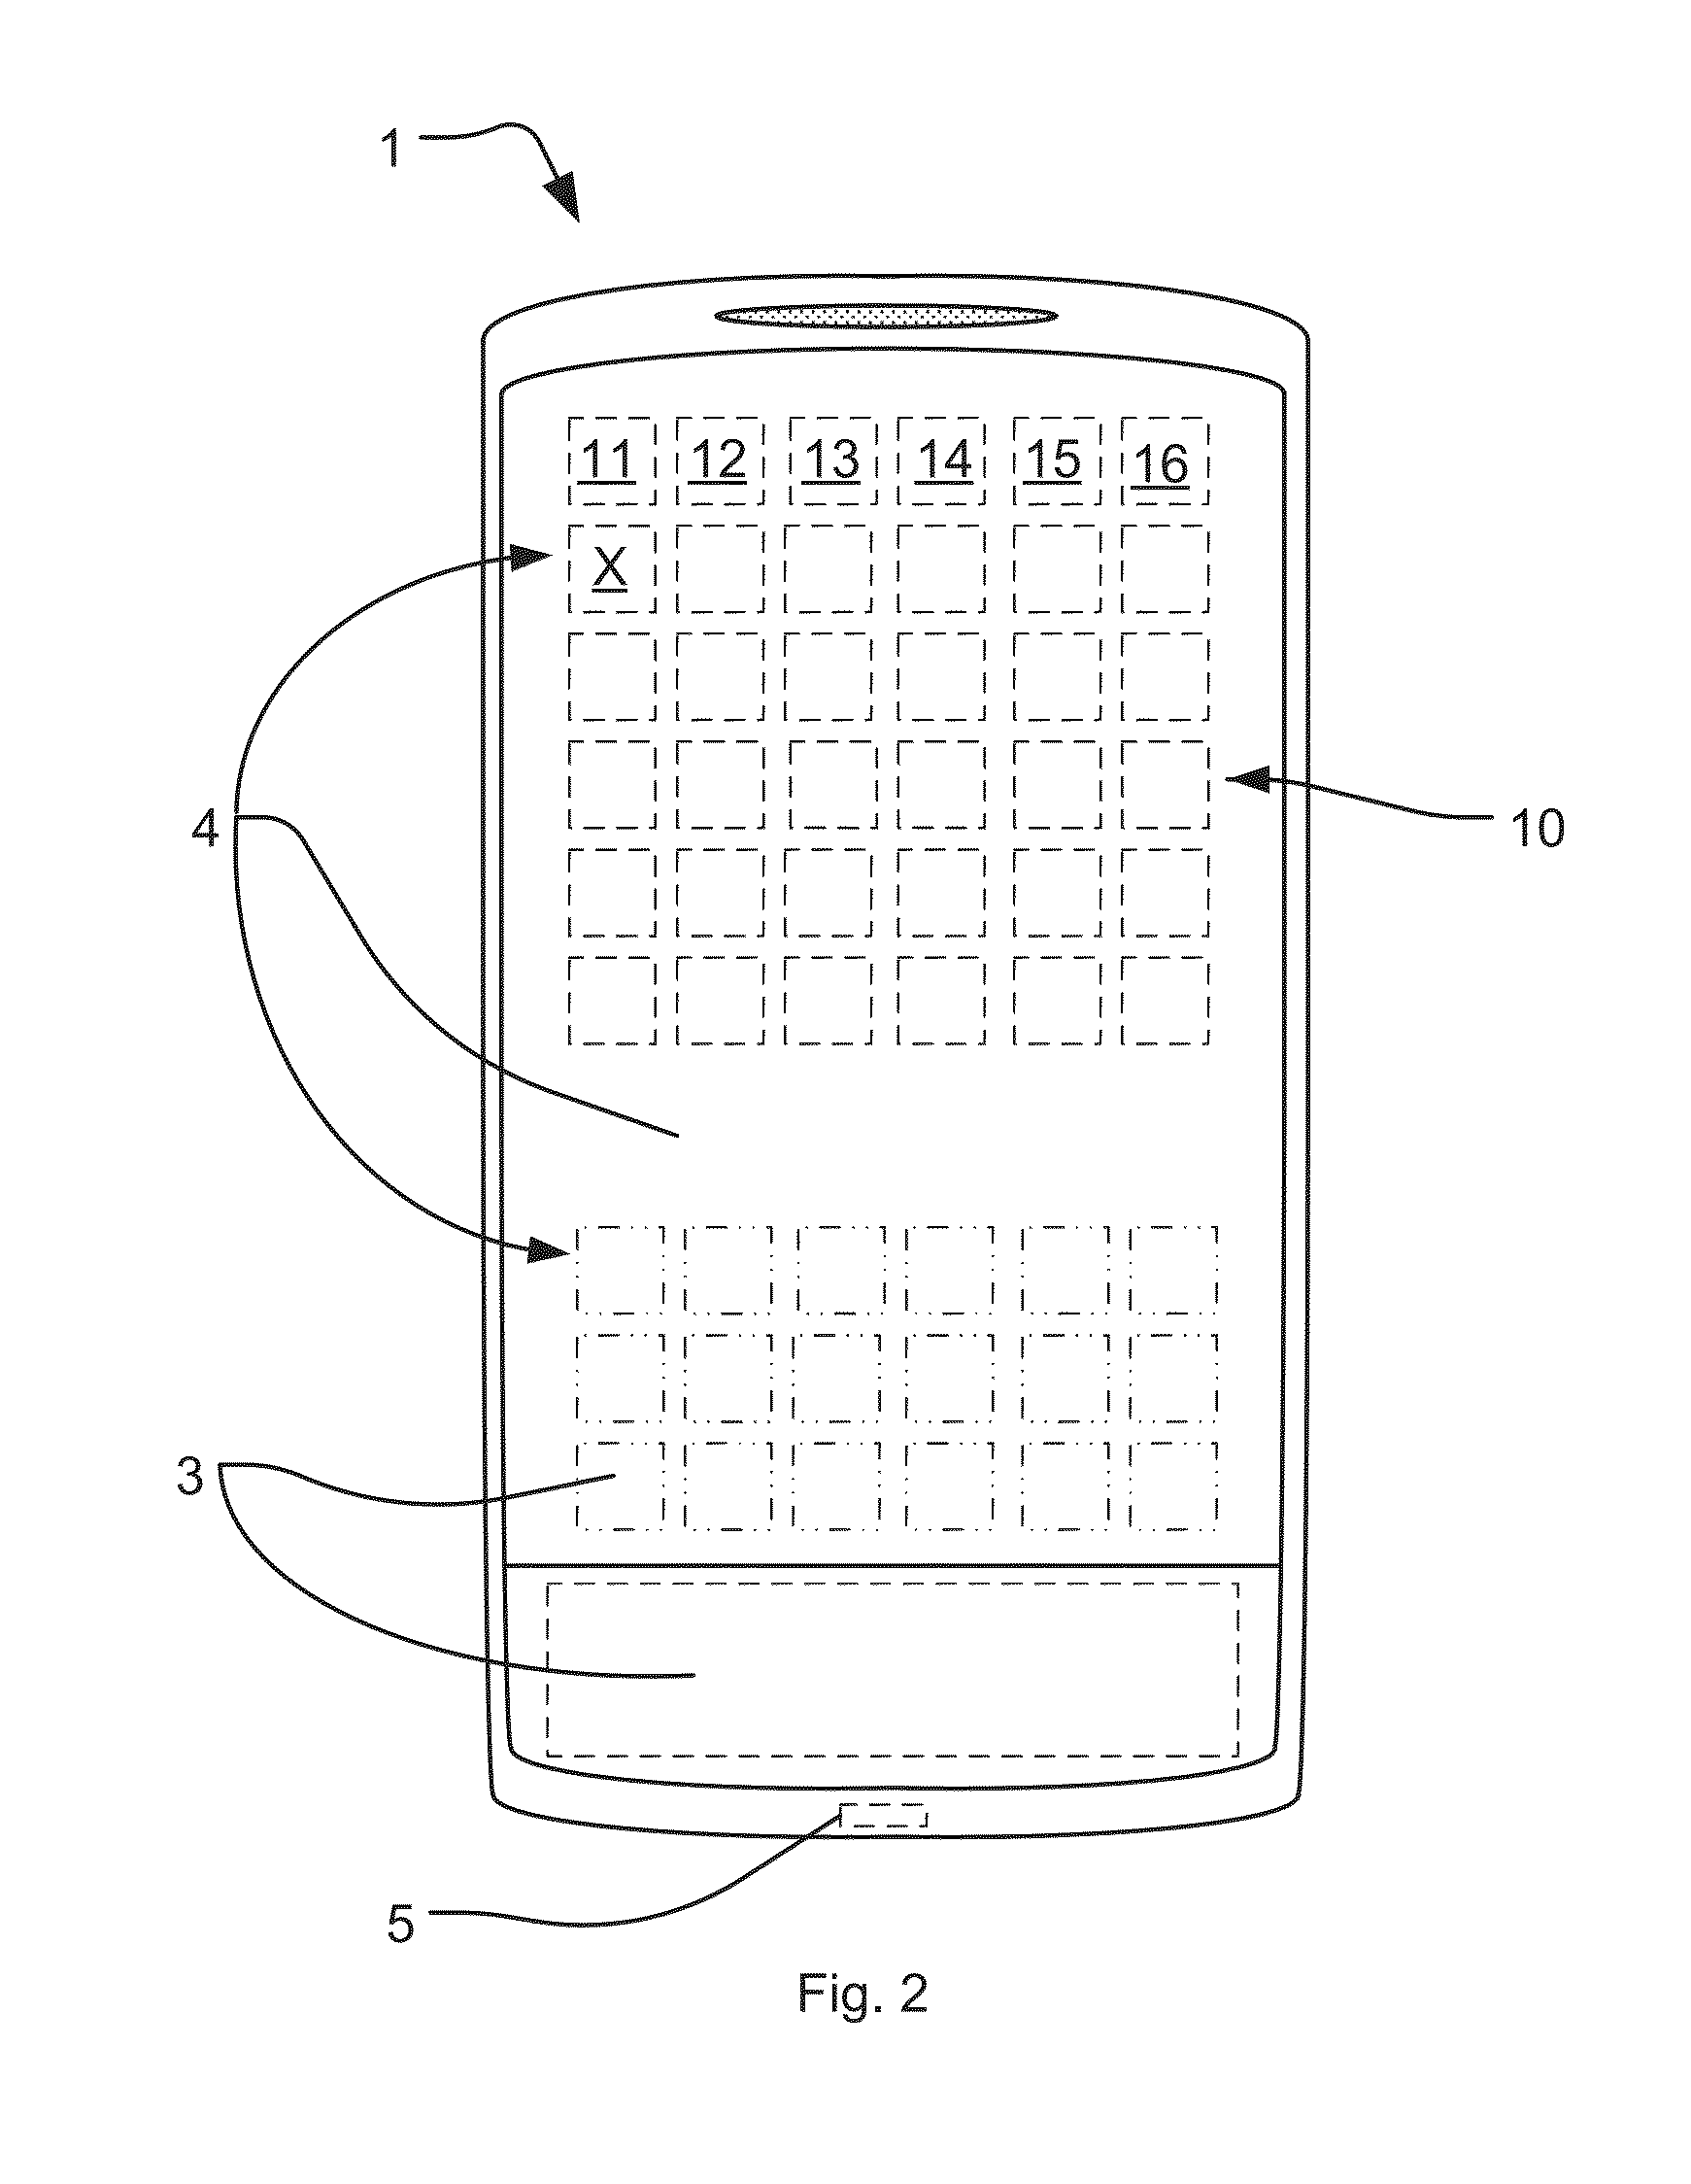 Method of controlling a graphical user interface for a mobile electronic device